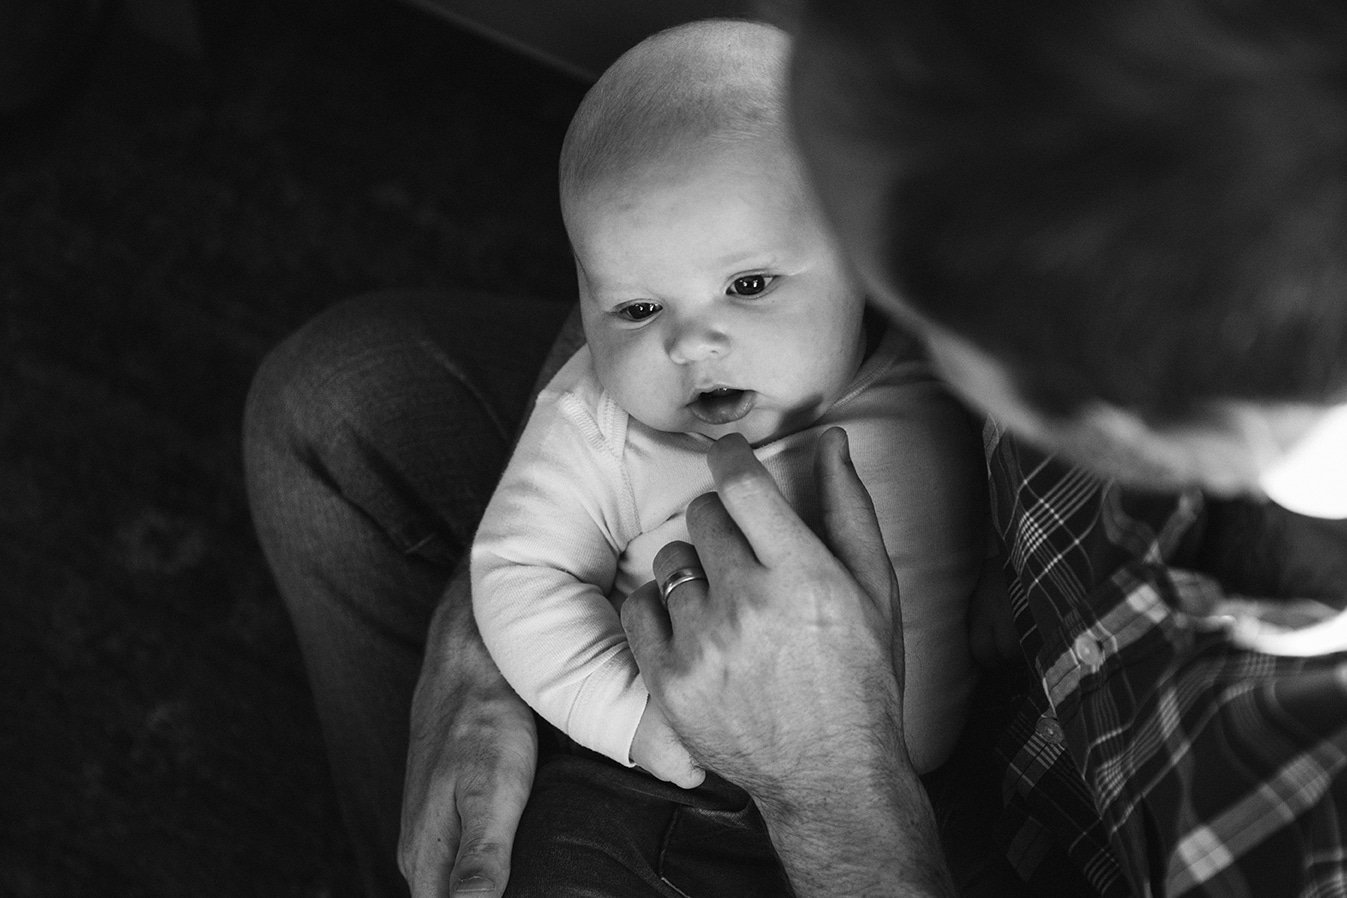 A documentary photograph of a dad holding his baby boy during an in home family lifestyle session in Boston, Massachusetts